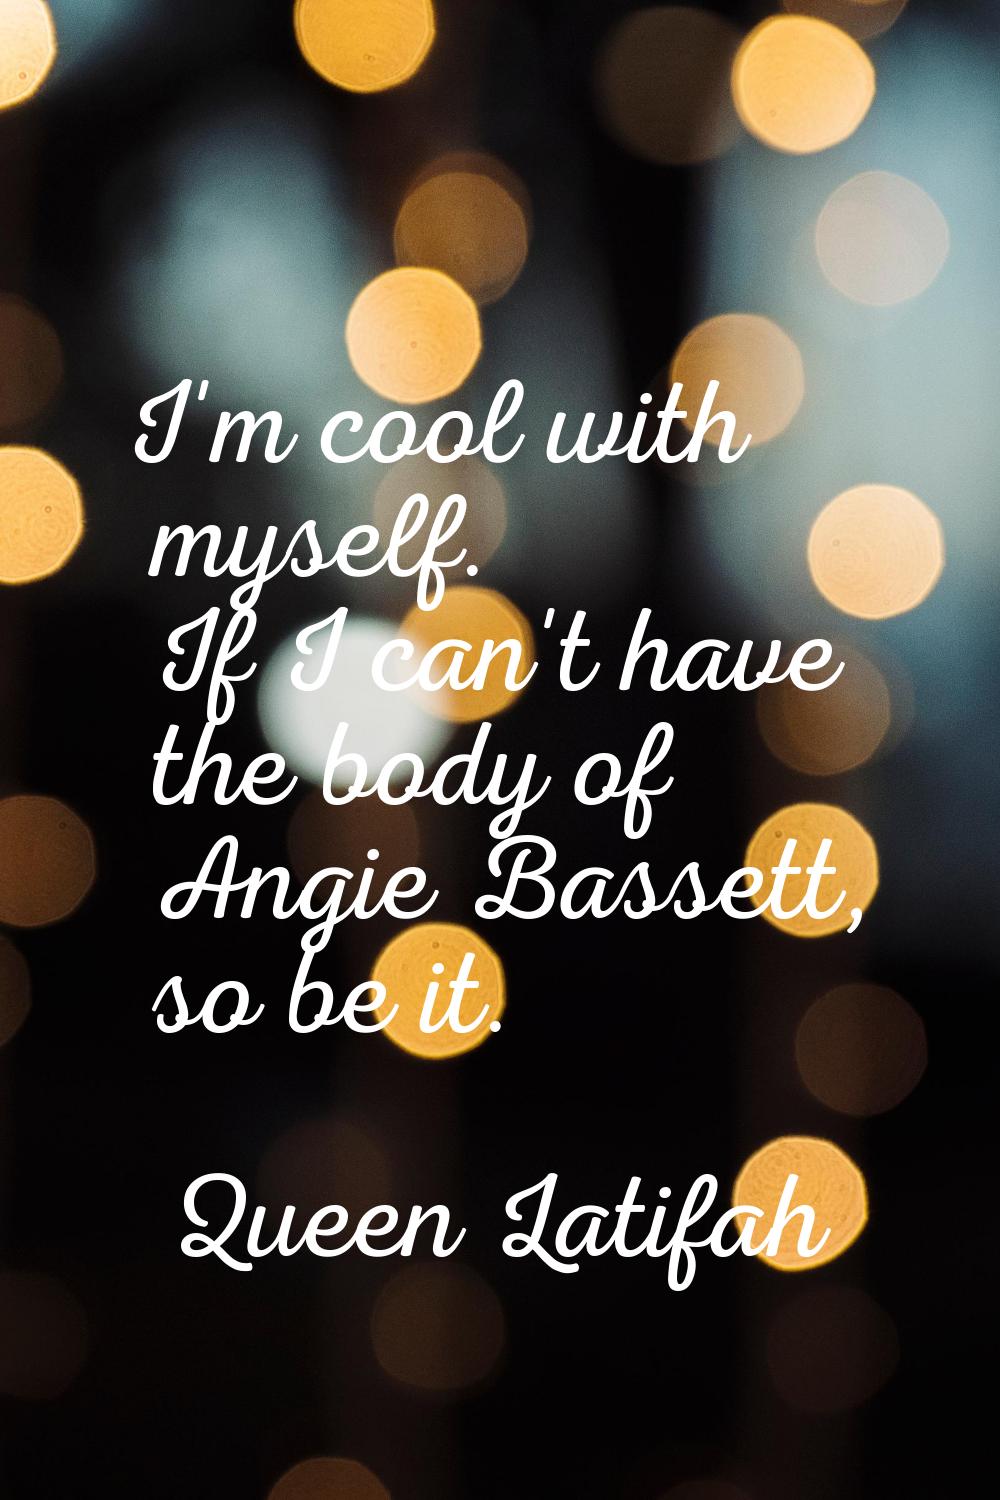 I'm cool with myself. If I can't have the body of Angie Bassett, so be it.